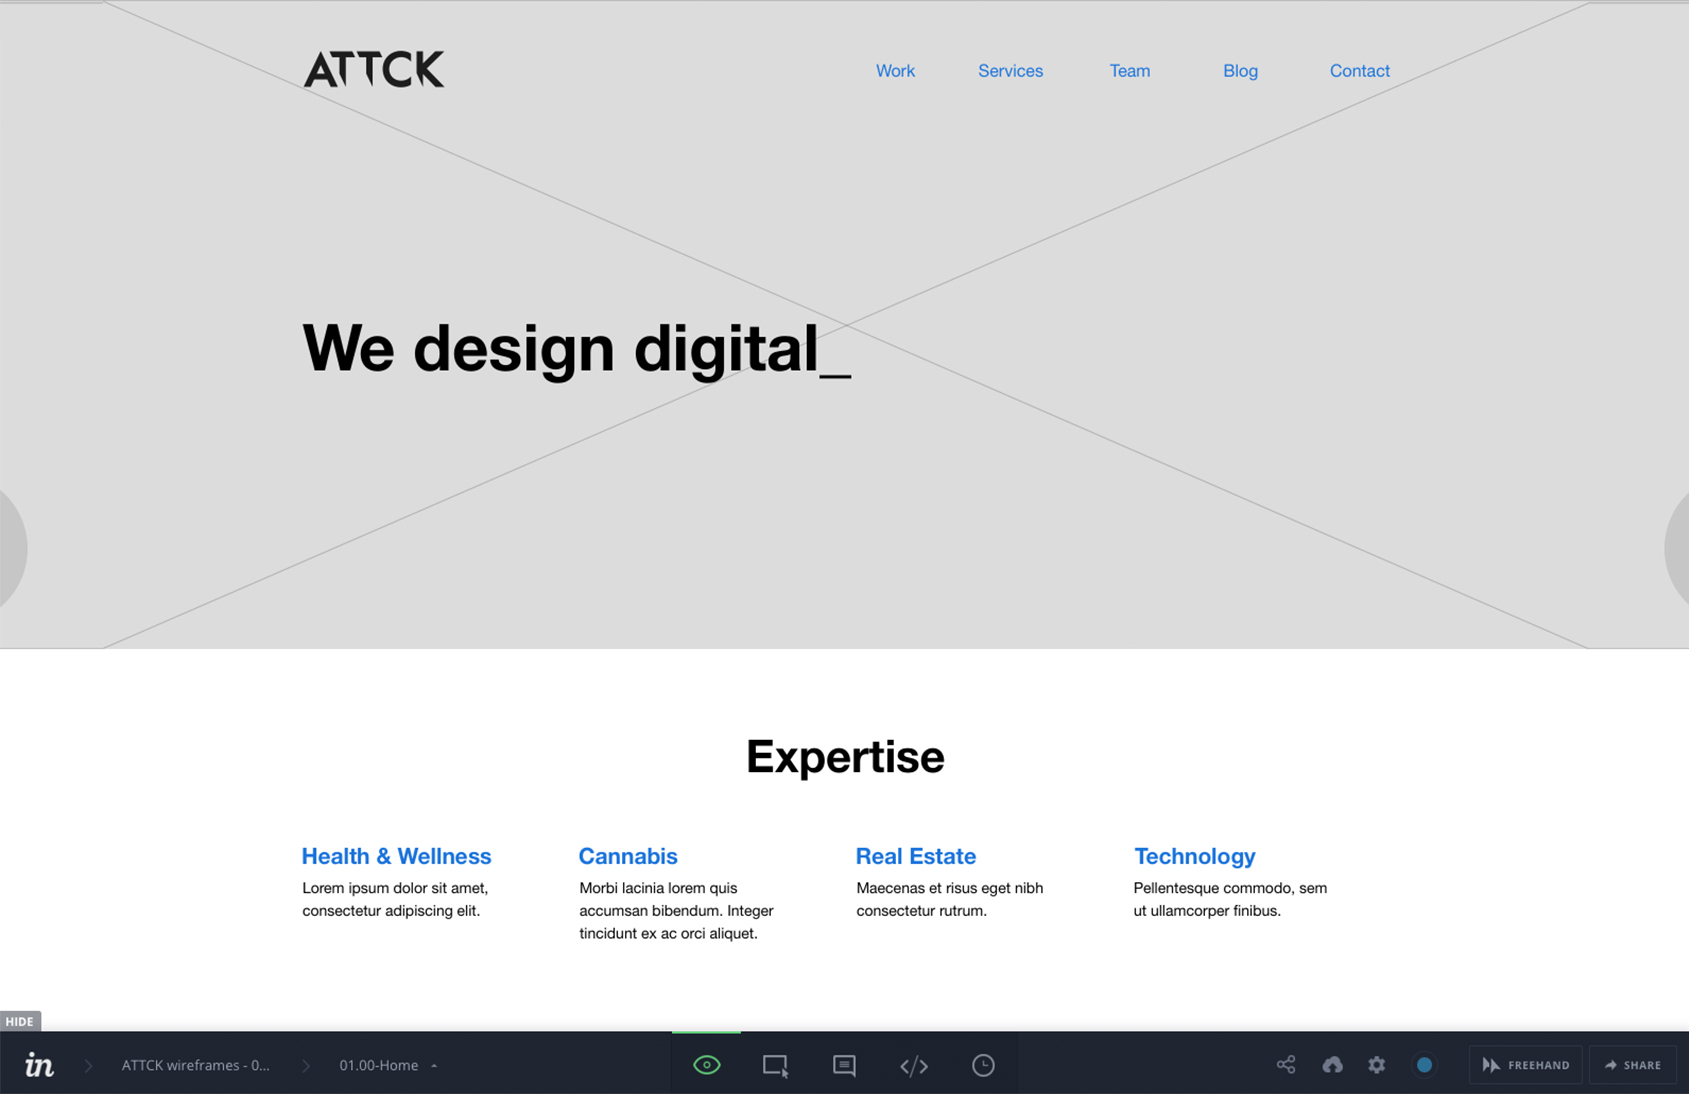 Wireframe example for ATTCK.com. Home page